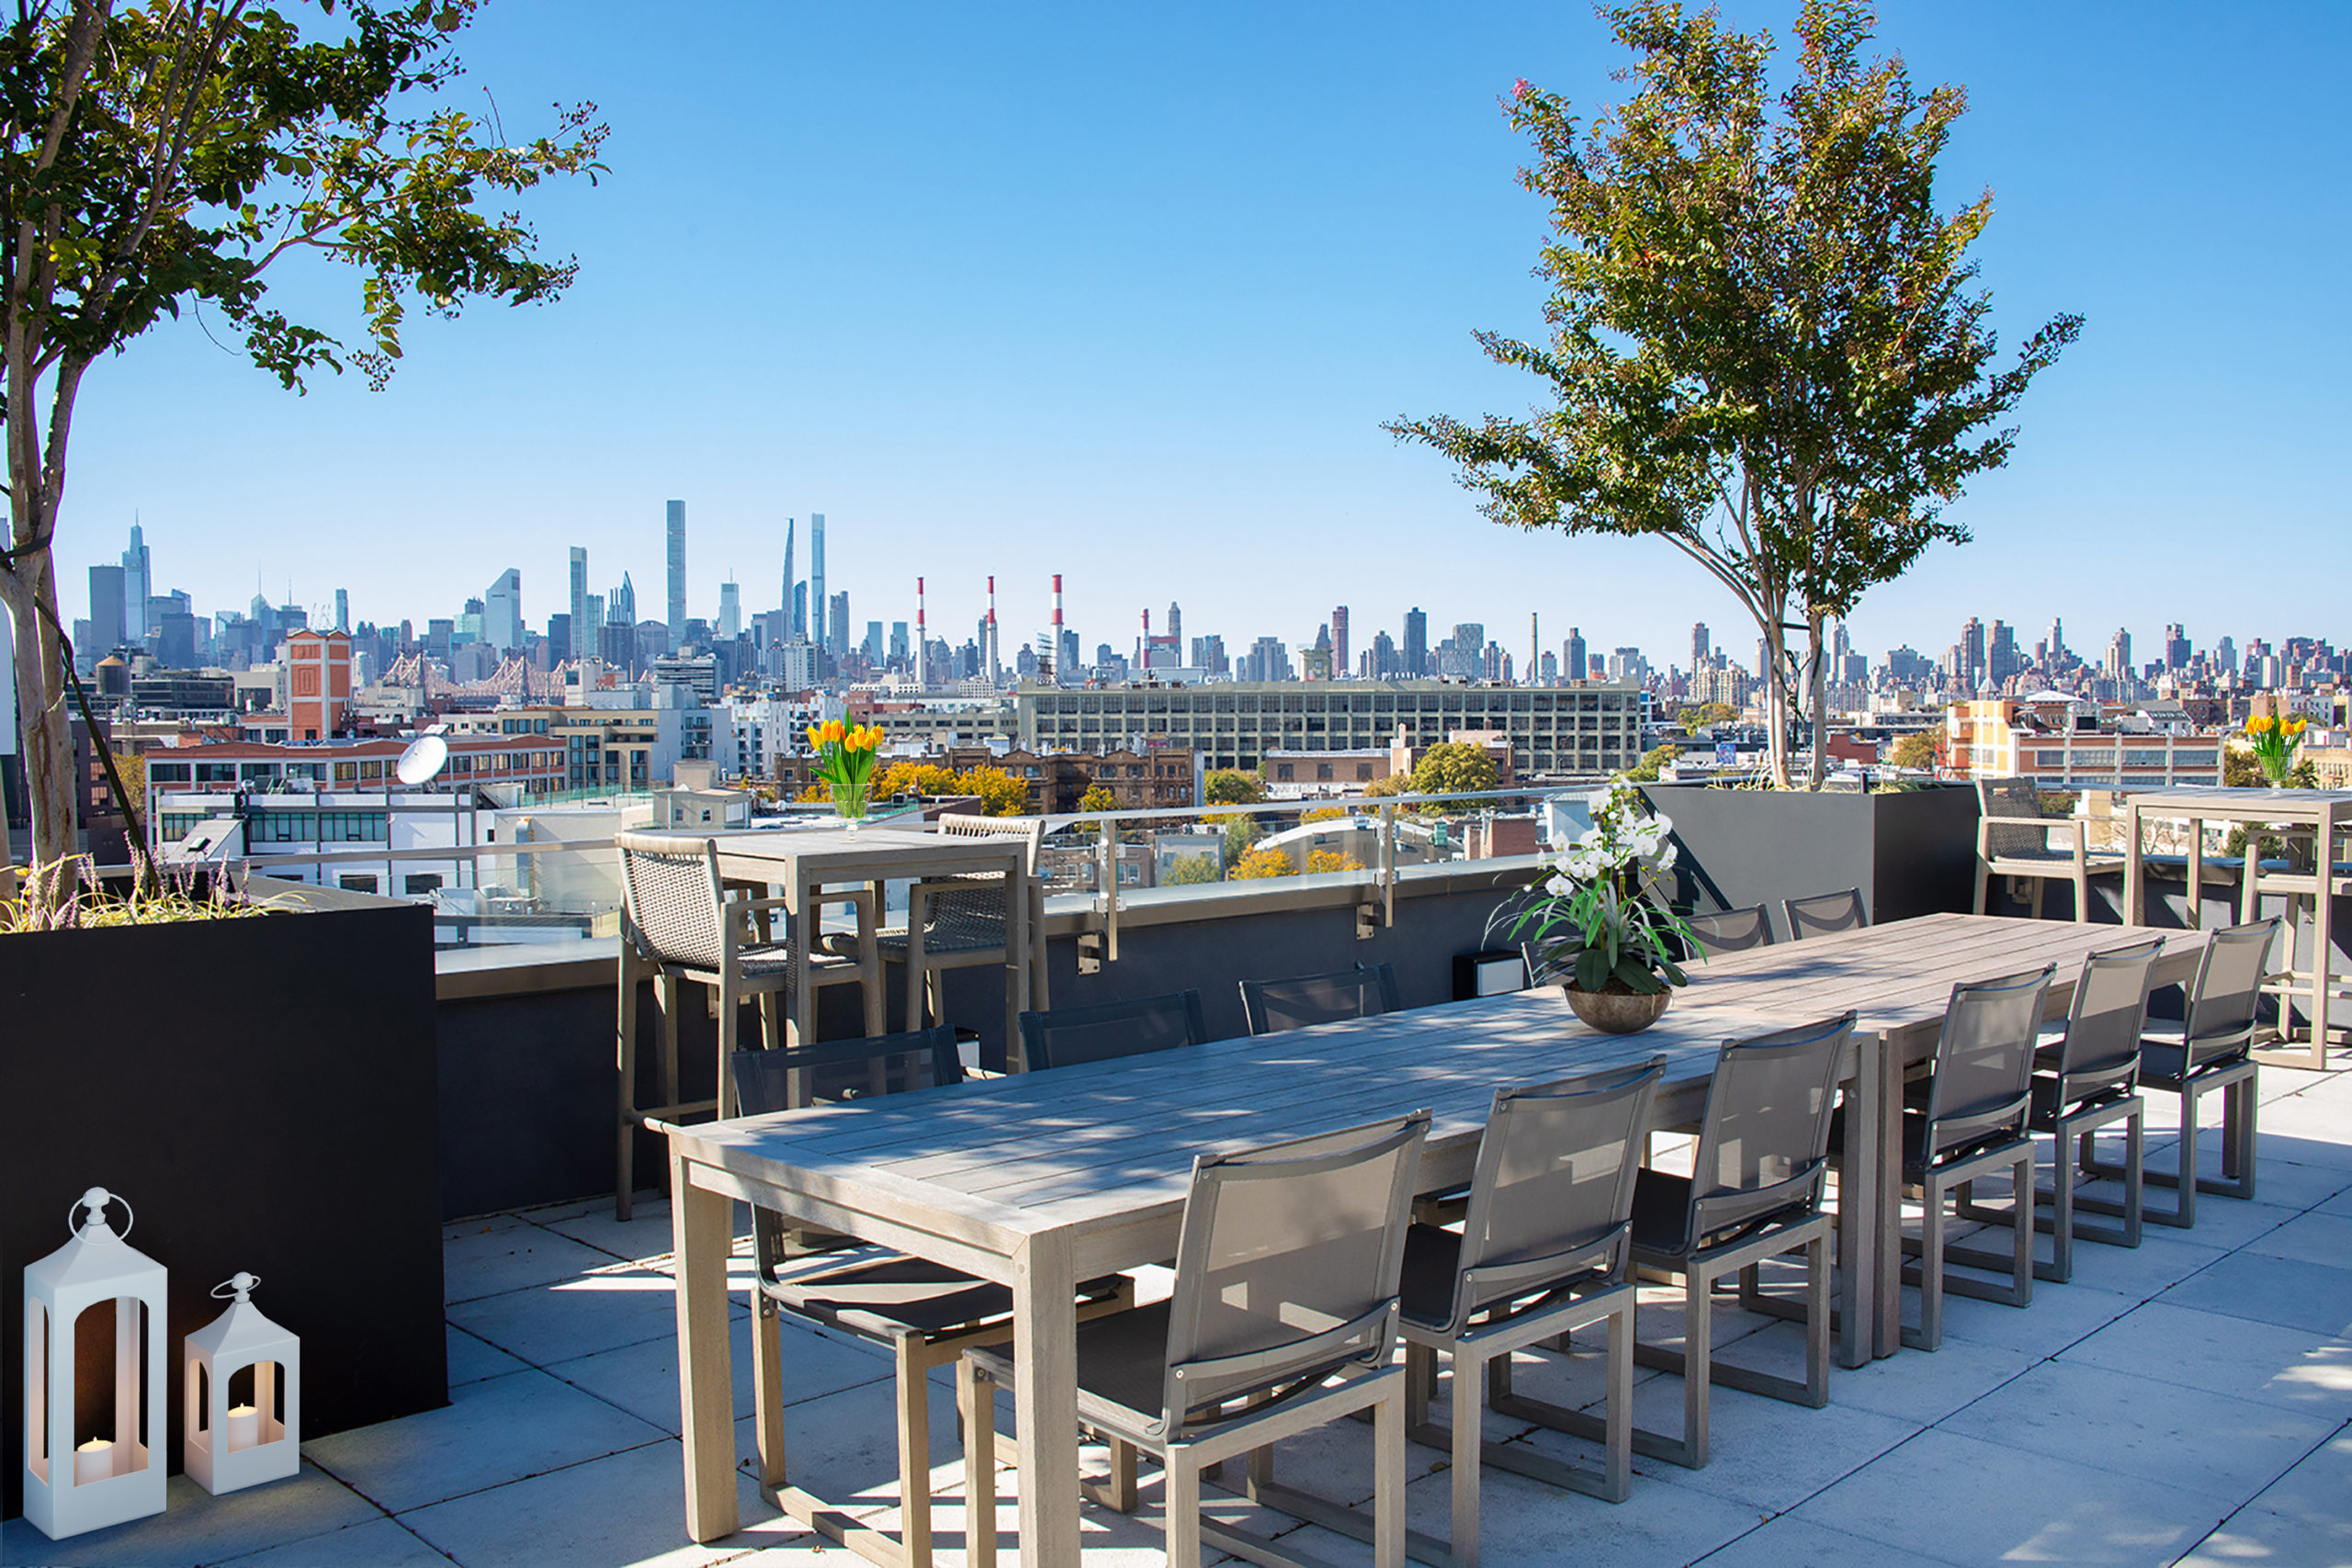 Roof deck with city views, long shared dining seating, high top tables and trees